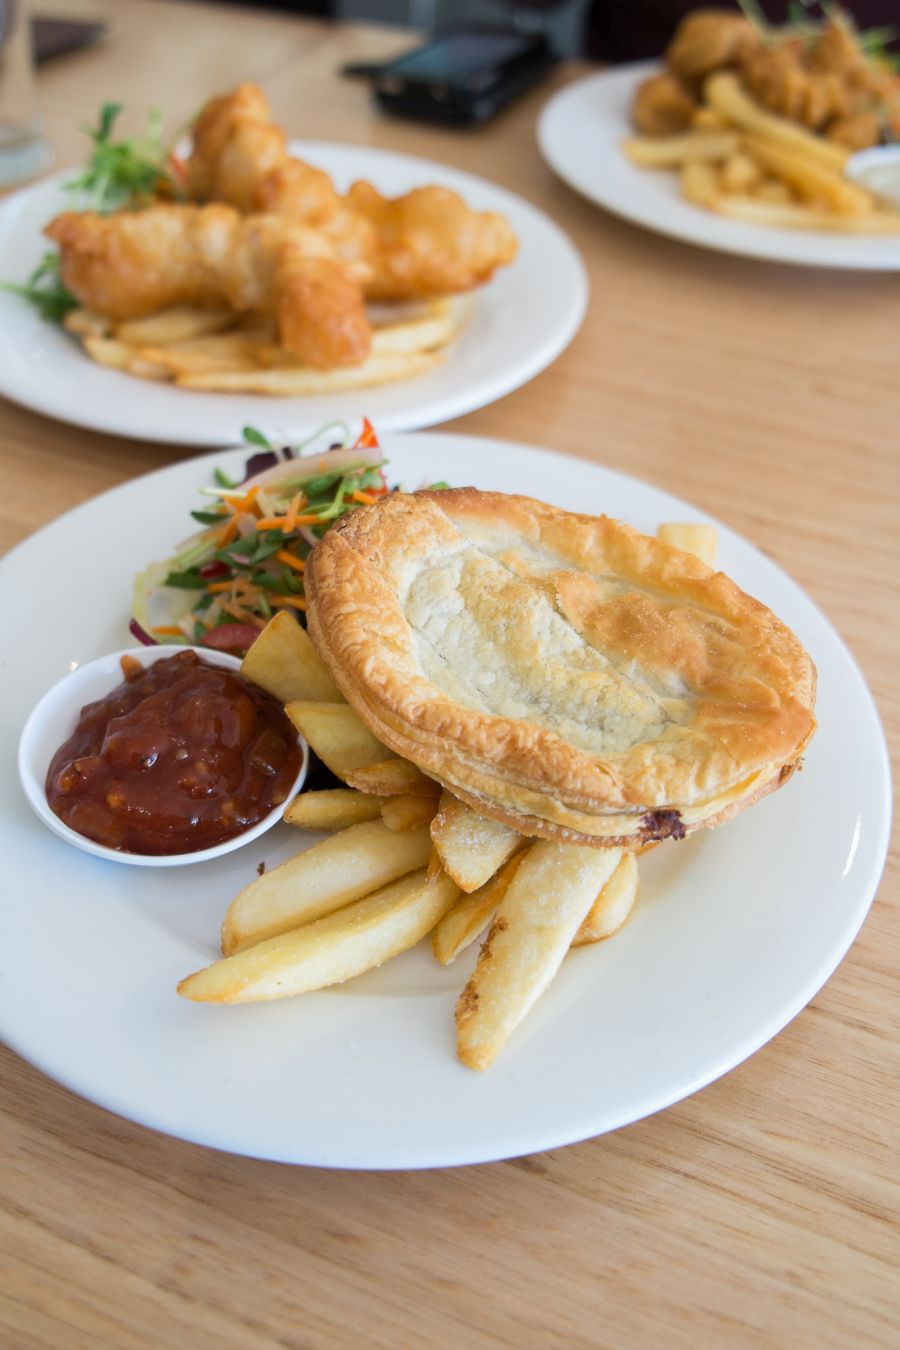 Cascade Stout and beef pie with chunky chips and salad (AU$15)